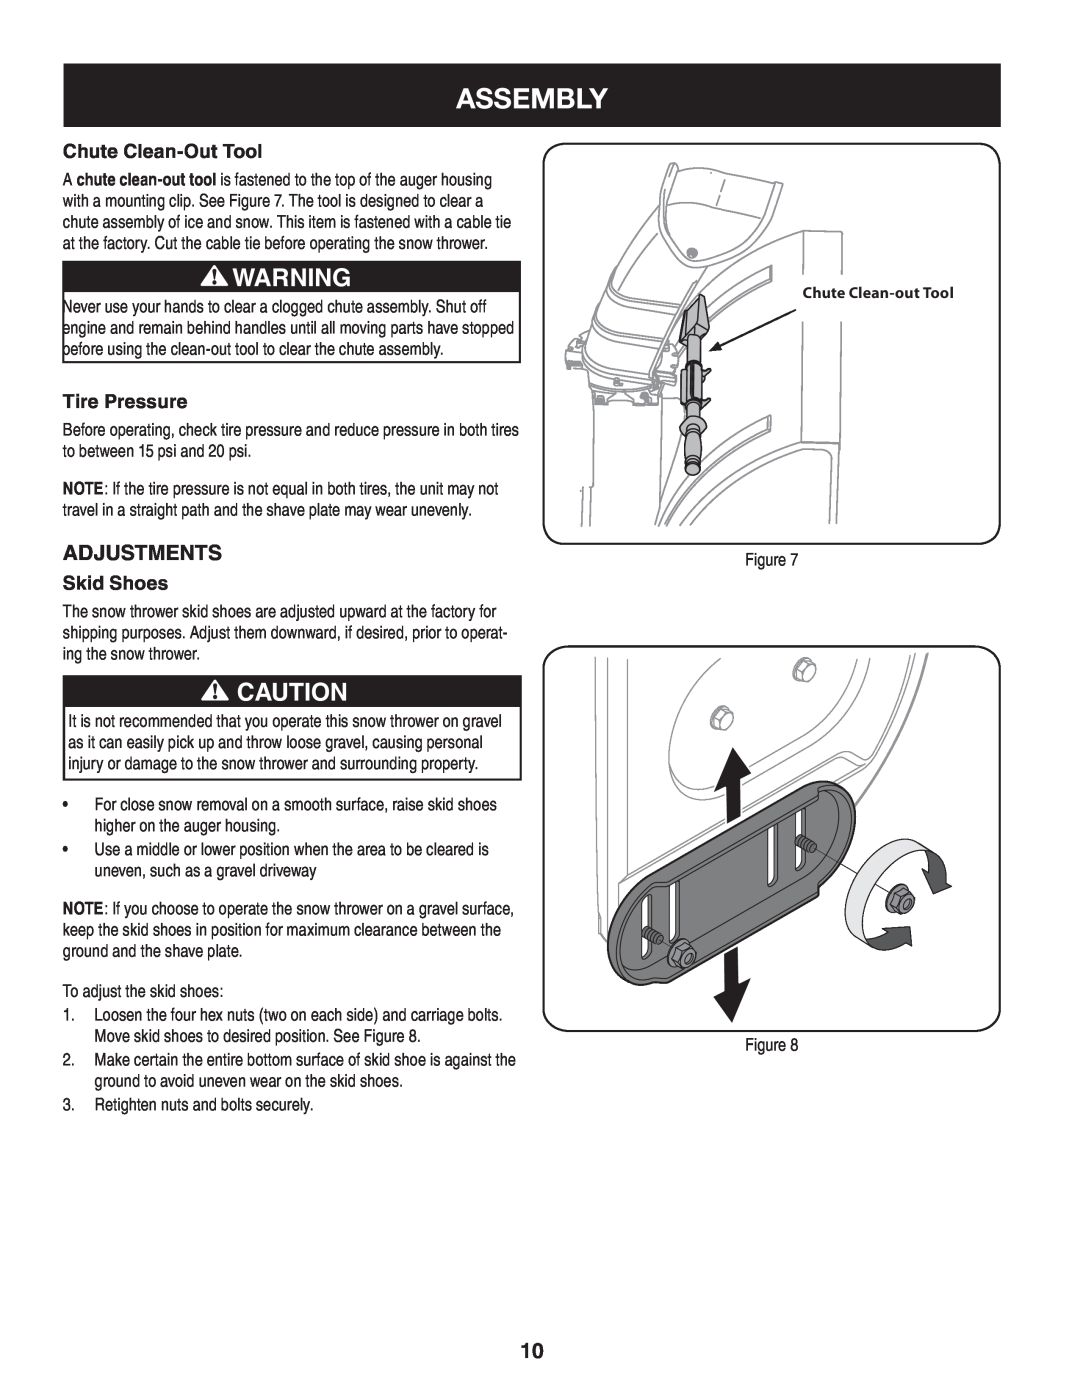 Sears 247.8879 operating instructions Assembly, Adjustments, Chute Clean-Out Tool, Tire Pressure, Skid Shoes 